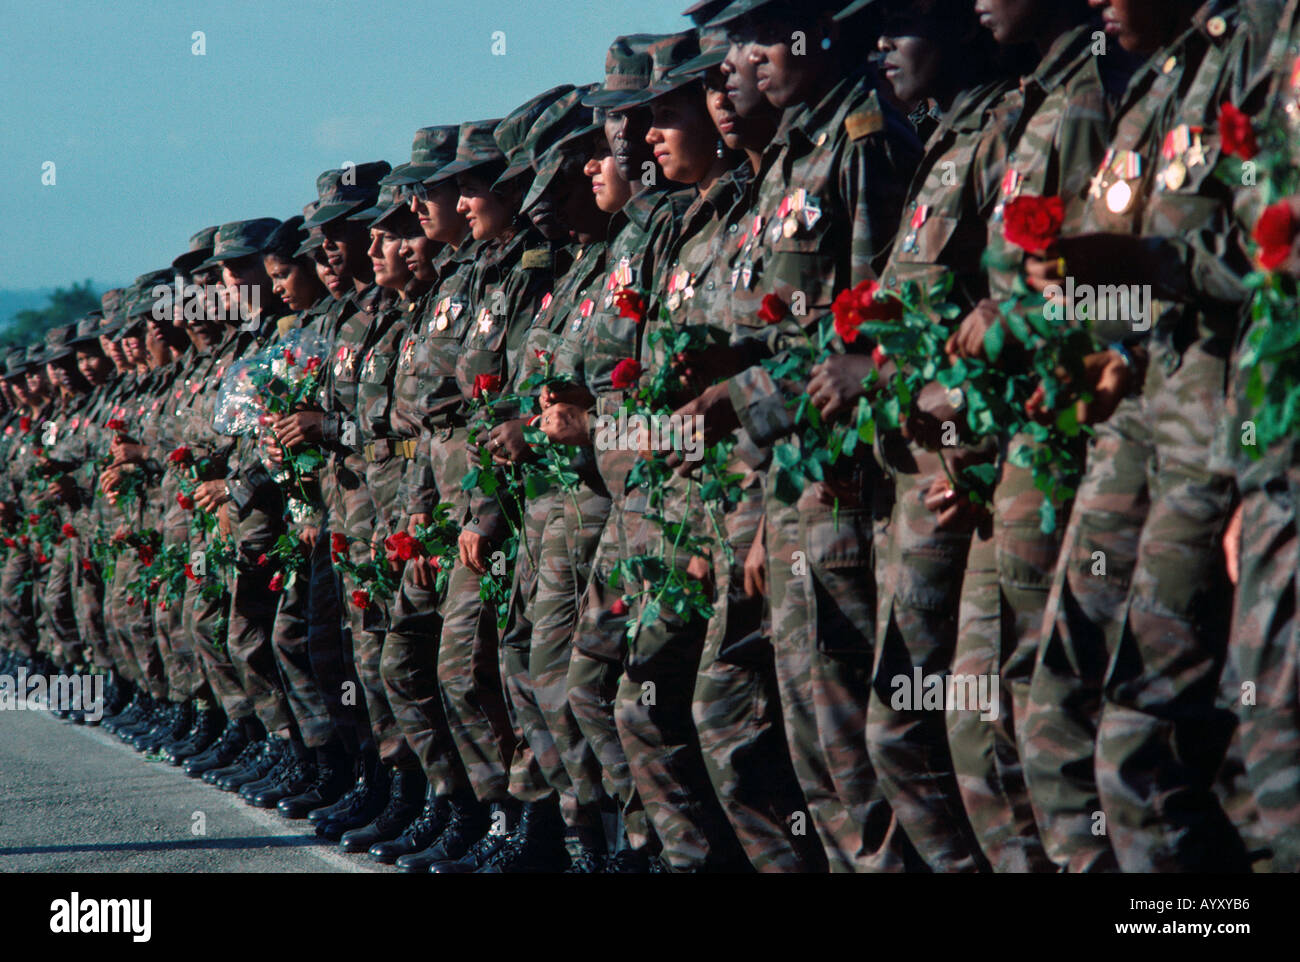 Cuban soldiers returning from Angola in 1989, Havana, Cuba Stock Photo